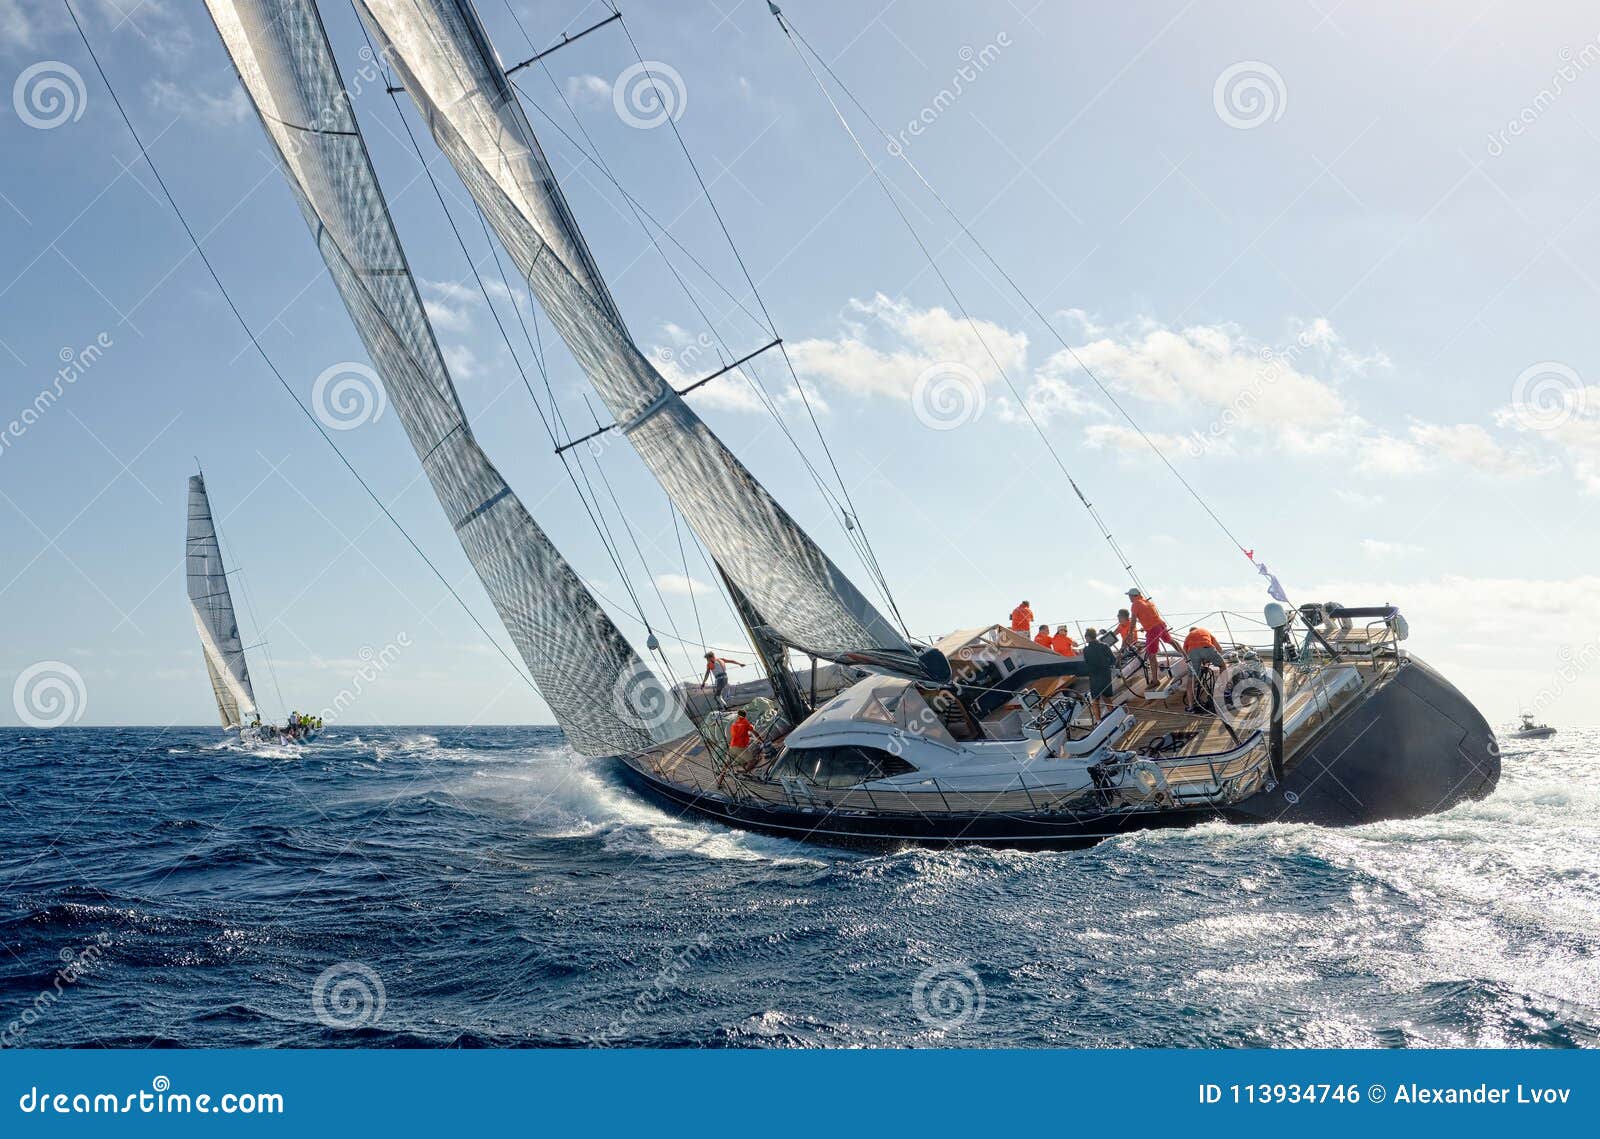 sailing yacht race. yachting. sailing yachts in the sea